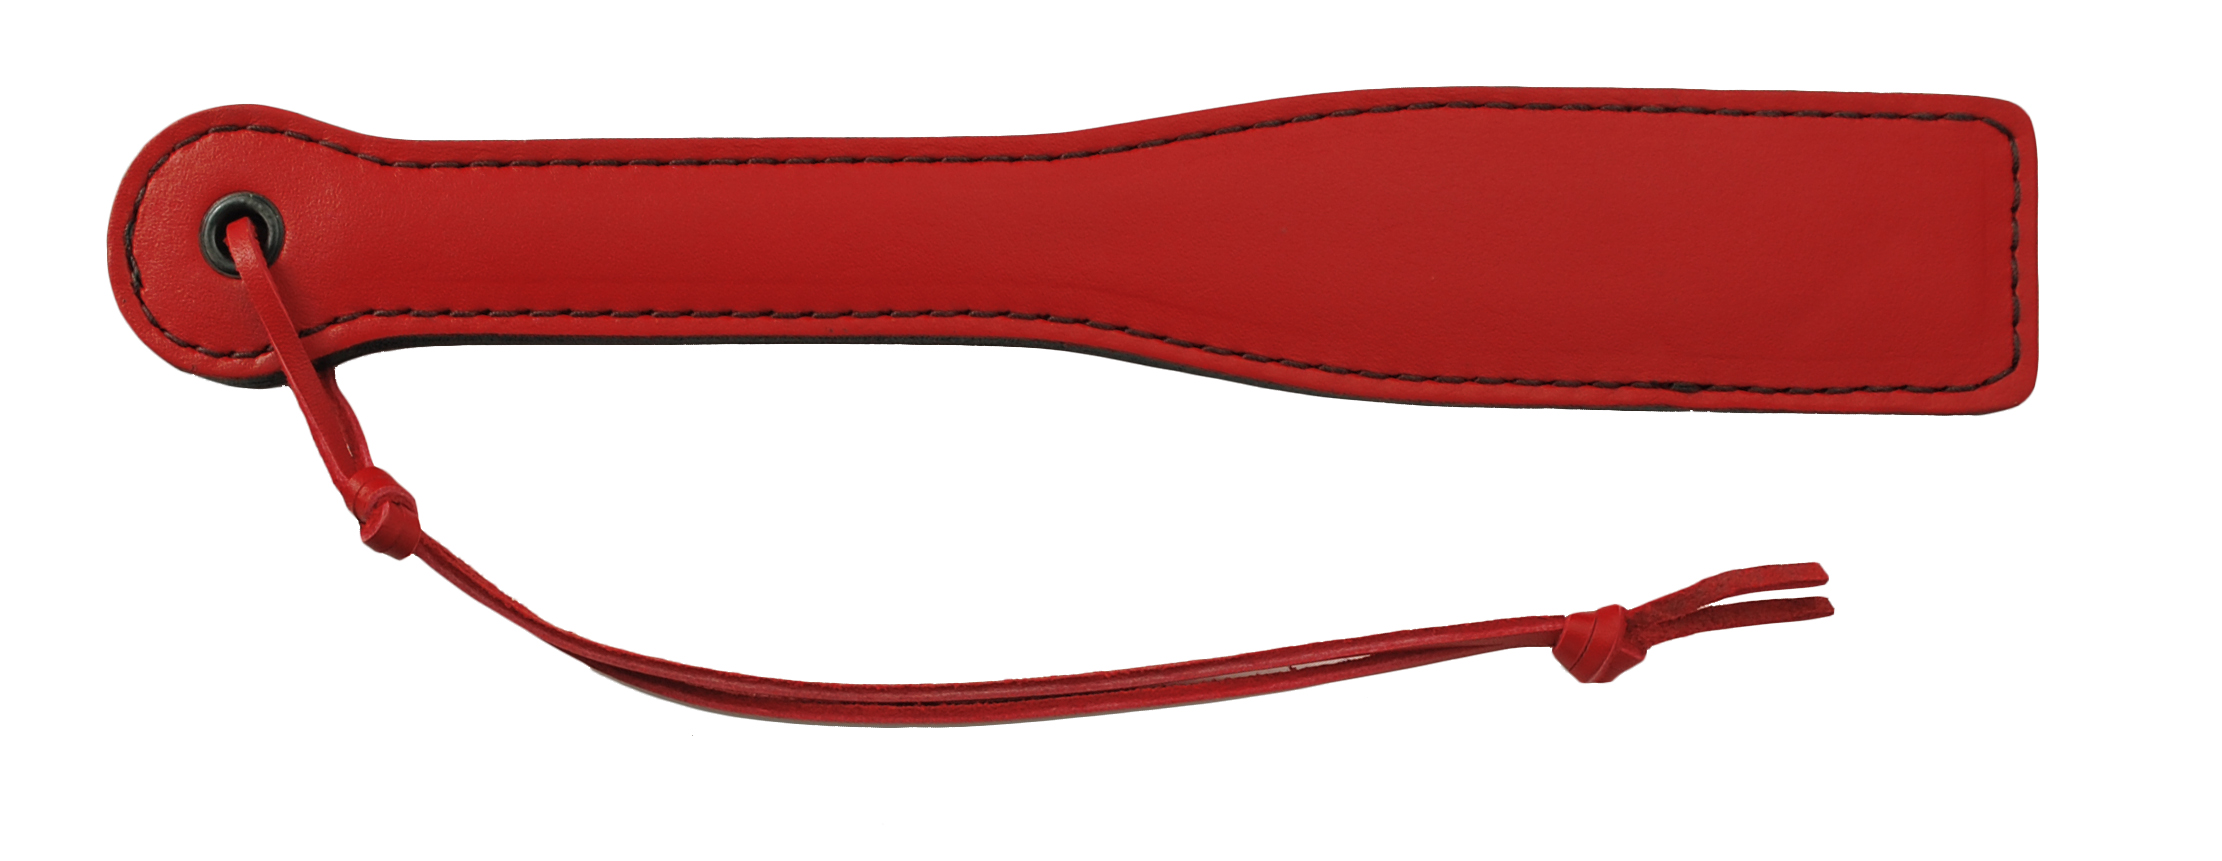 Red+Leather+12+inch+Paddle